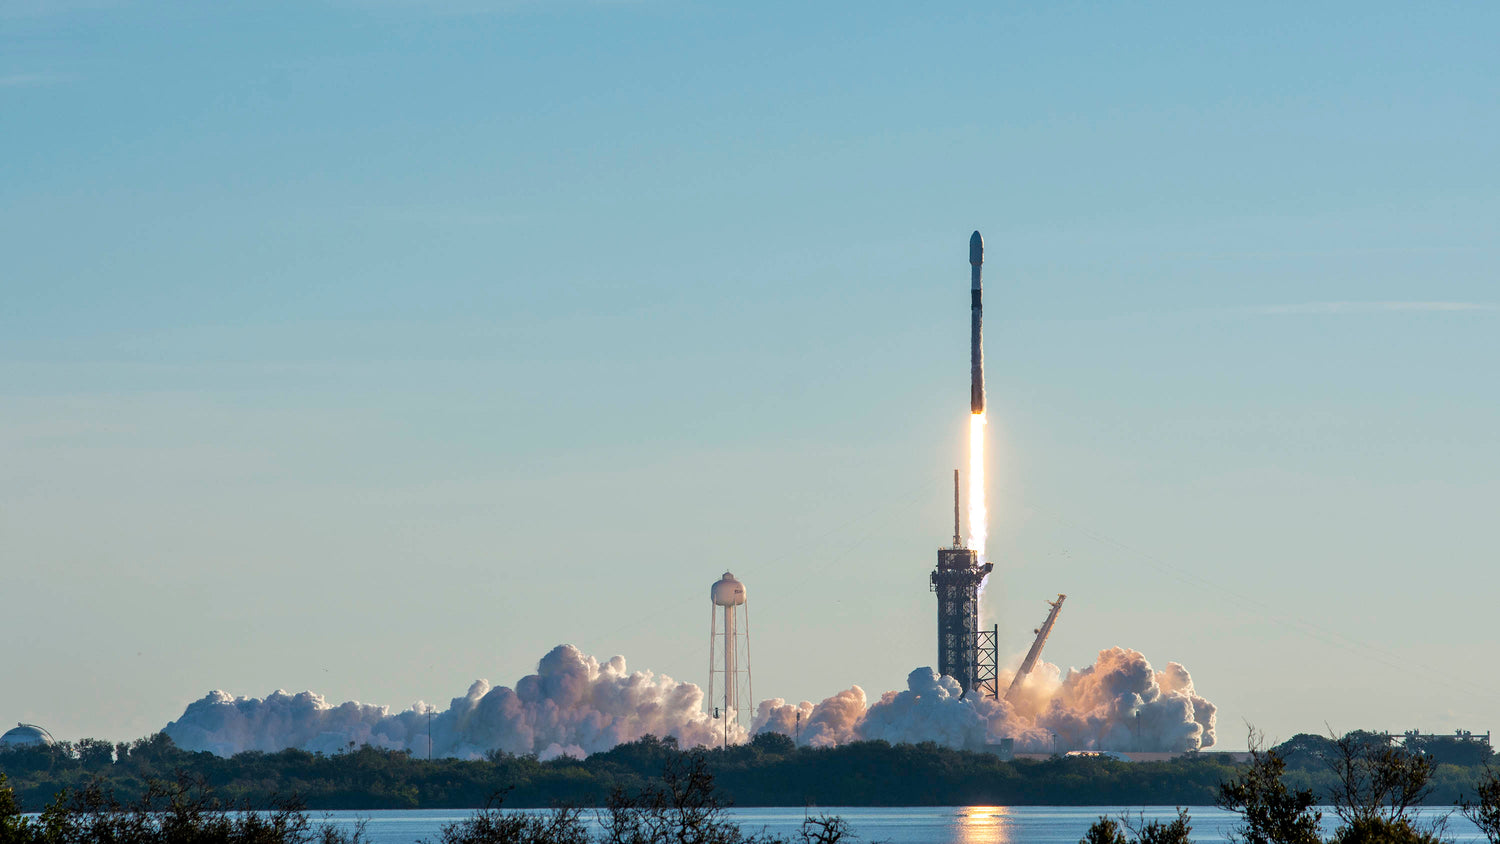 SpaceX Reaches Milestone Of Over 1,000 Starlink Satellites Deployed